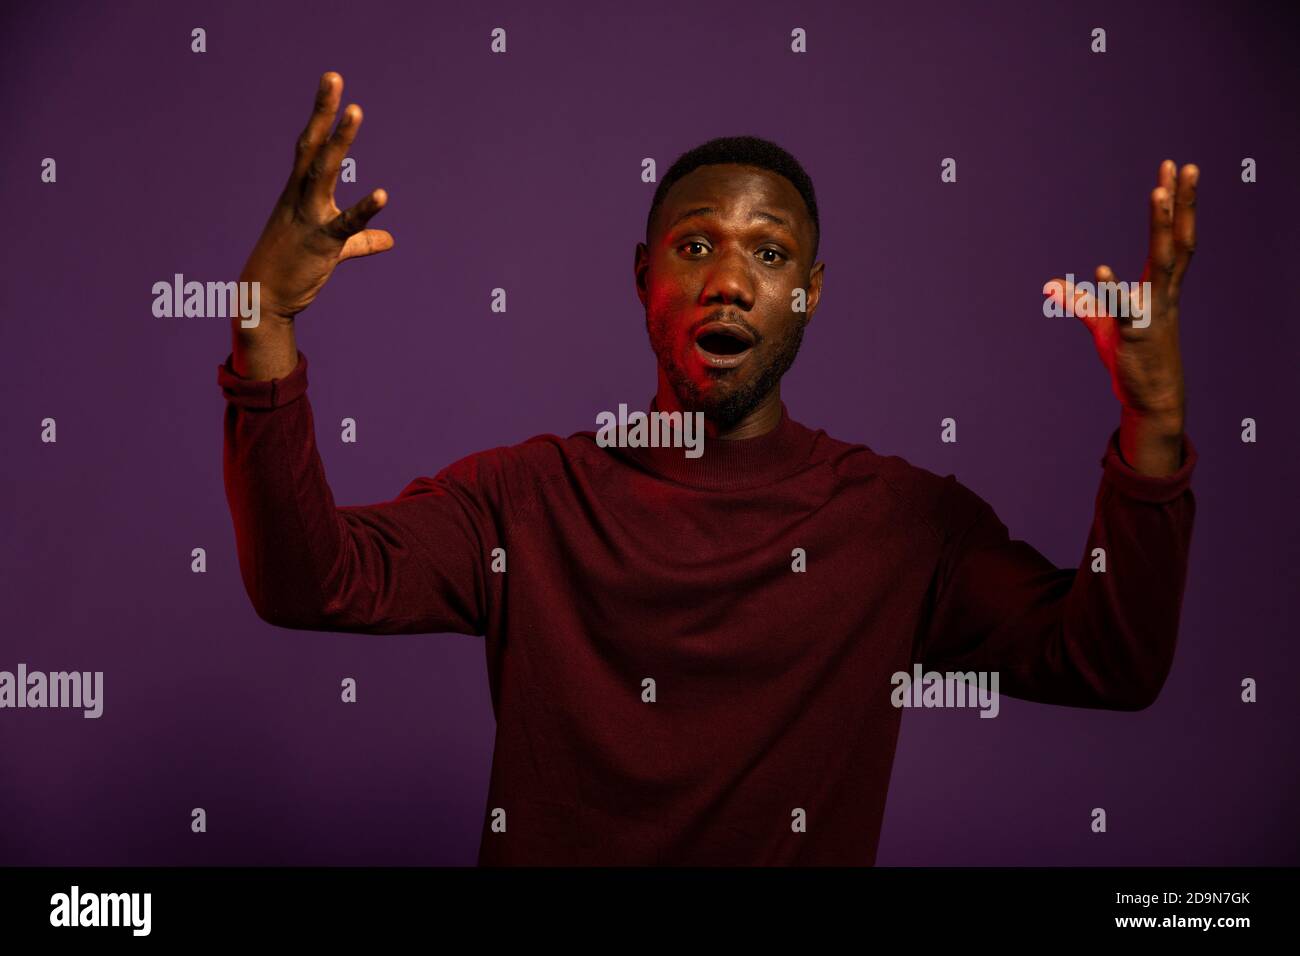 Black man with arms raised in surprise. Body language and facial expression. Medium shot. Isolated background. Looking at camera. Stock Photo